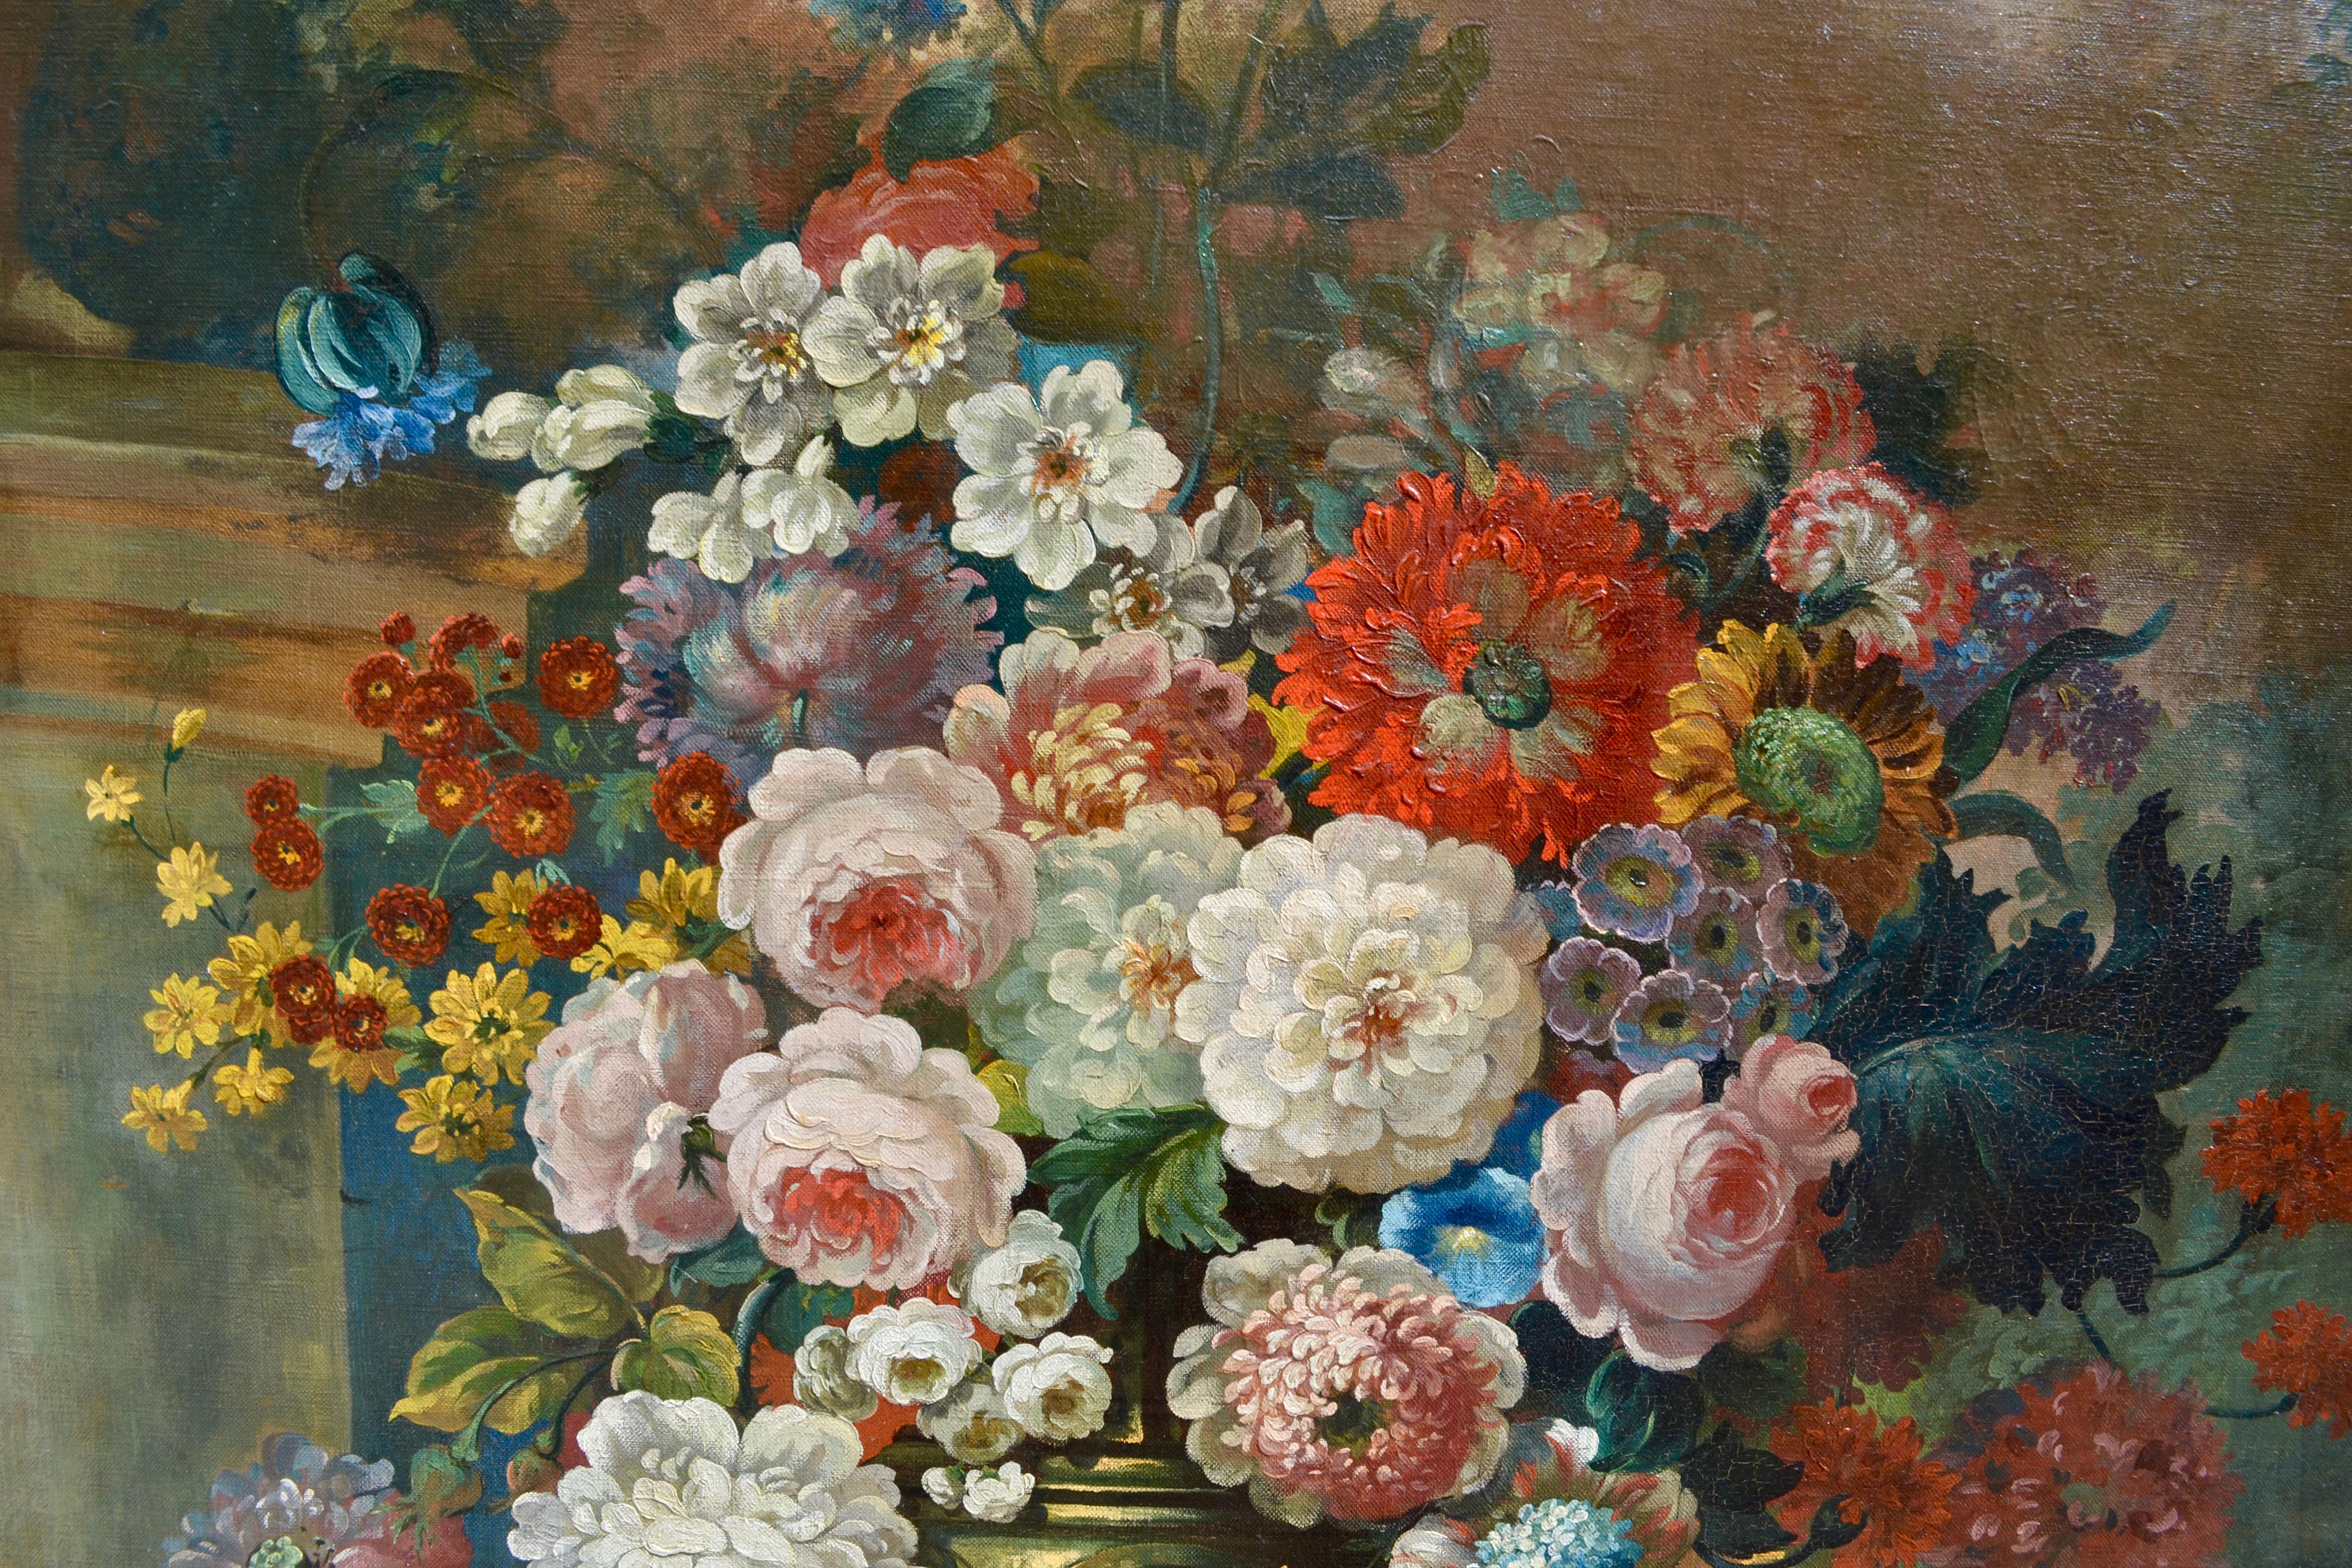 19th Century Large Signed Floral Still Life Painting with a Peacock